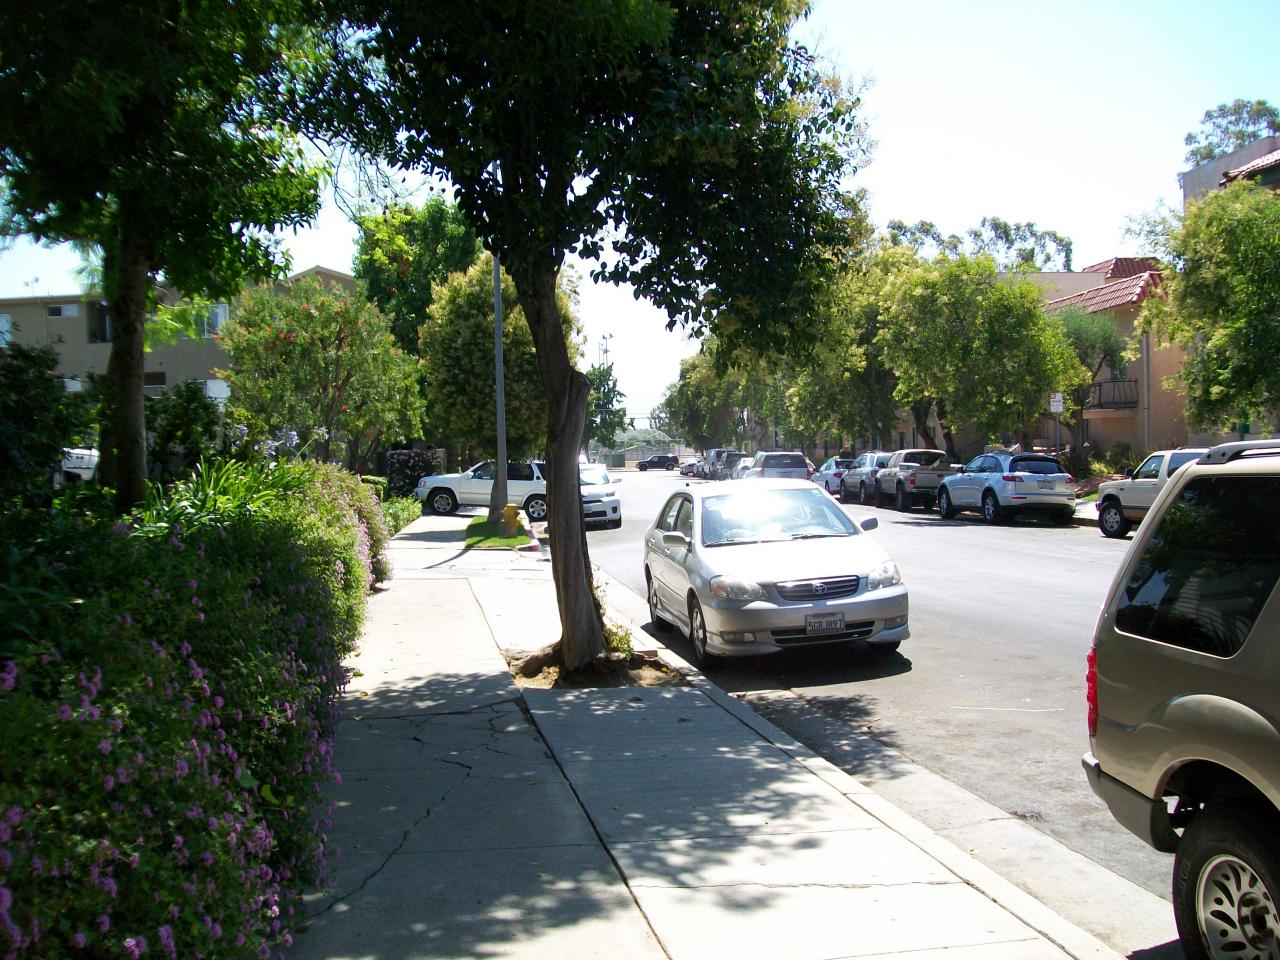 Photo of Kingsbury Villas Apartments - a view of the street out front of building